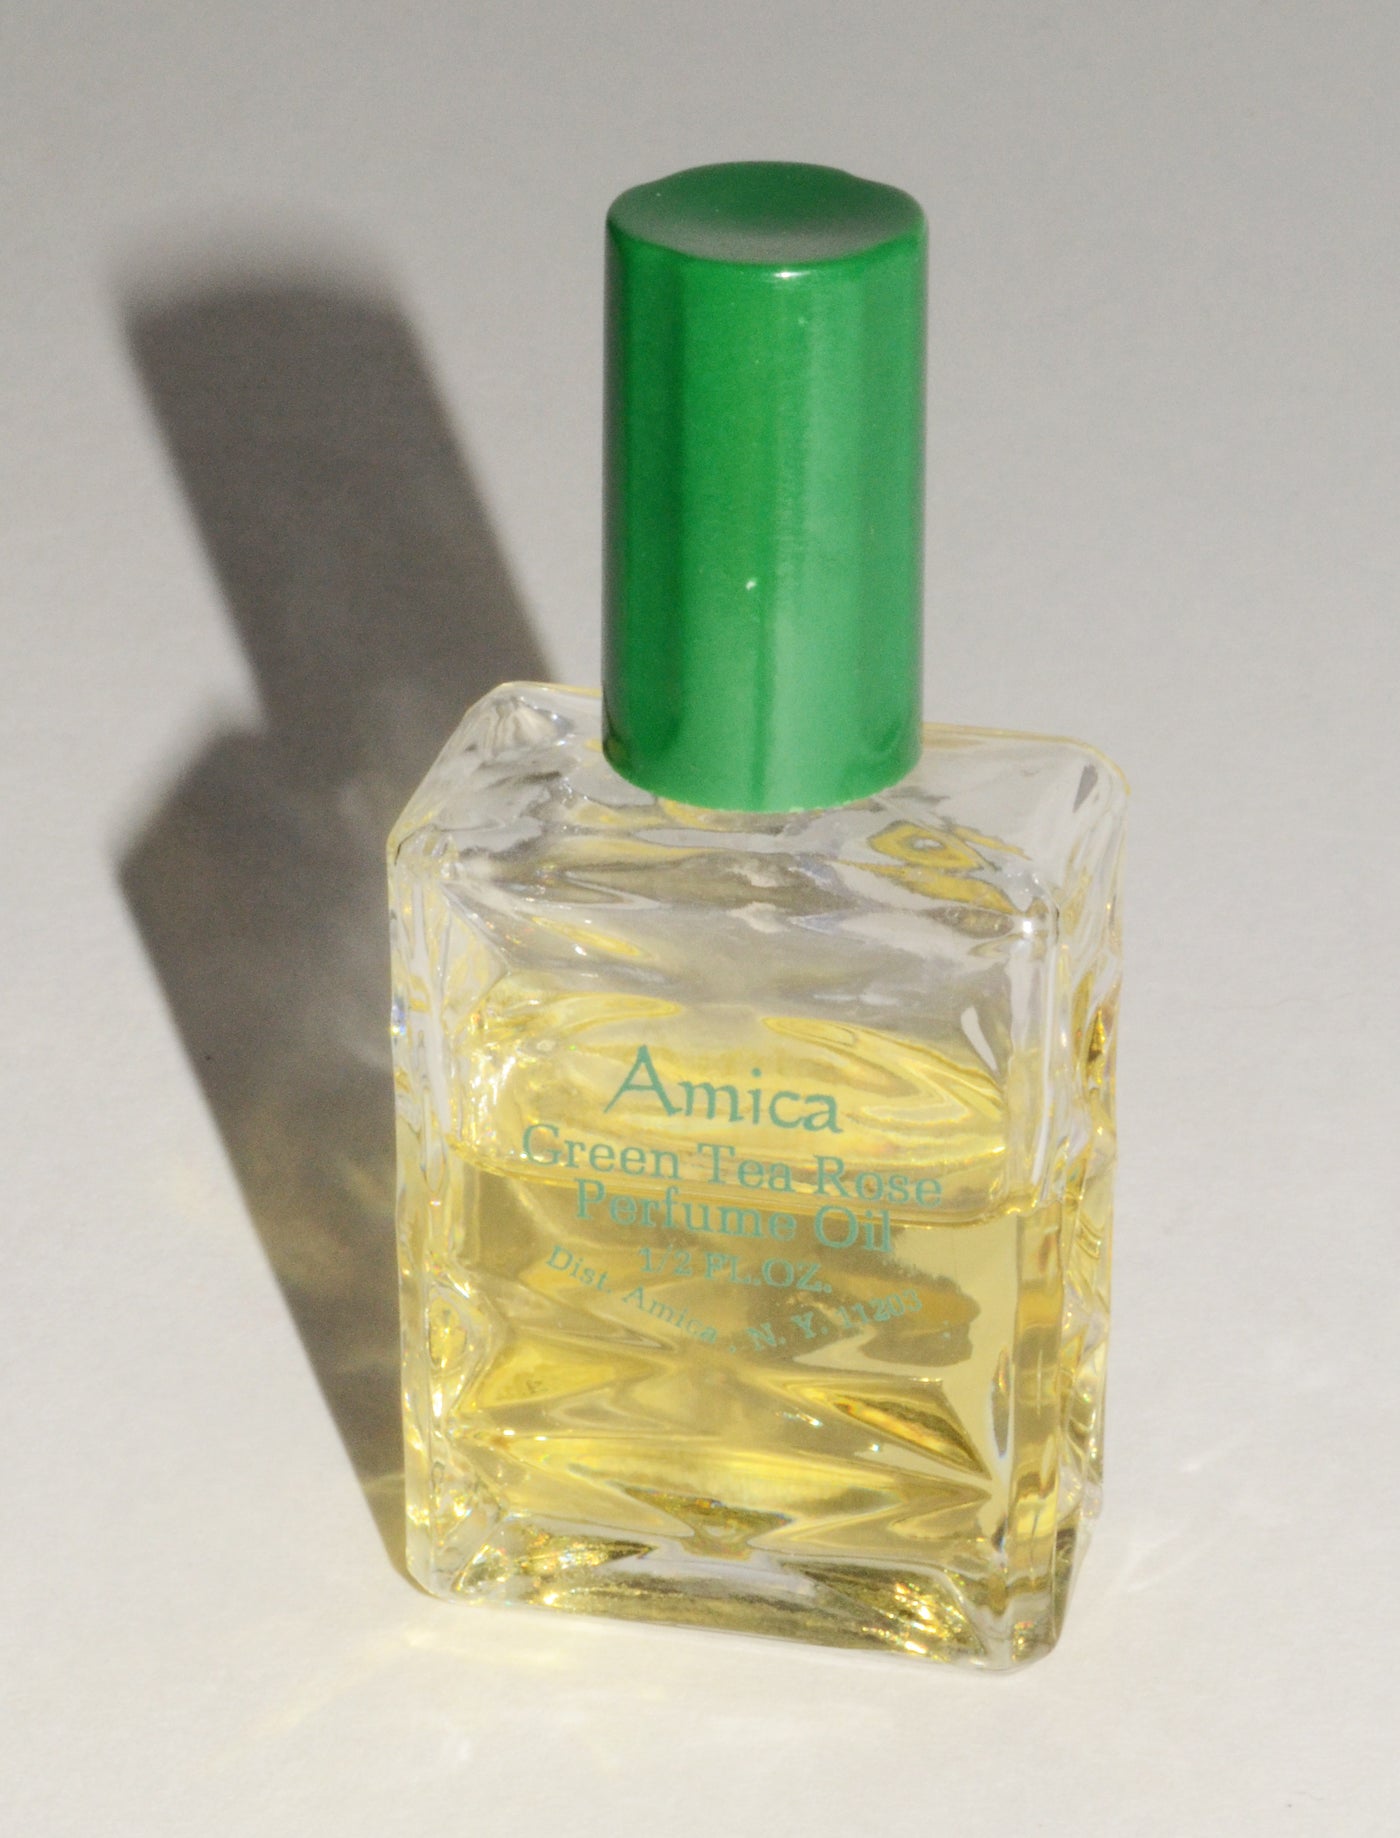 Vintage Green Tea Rose Perfume Oil By Amica